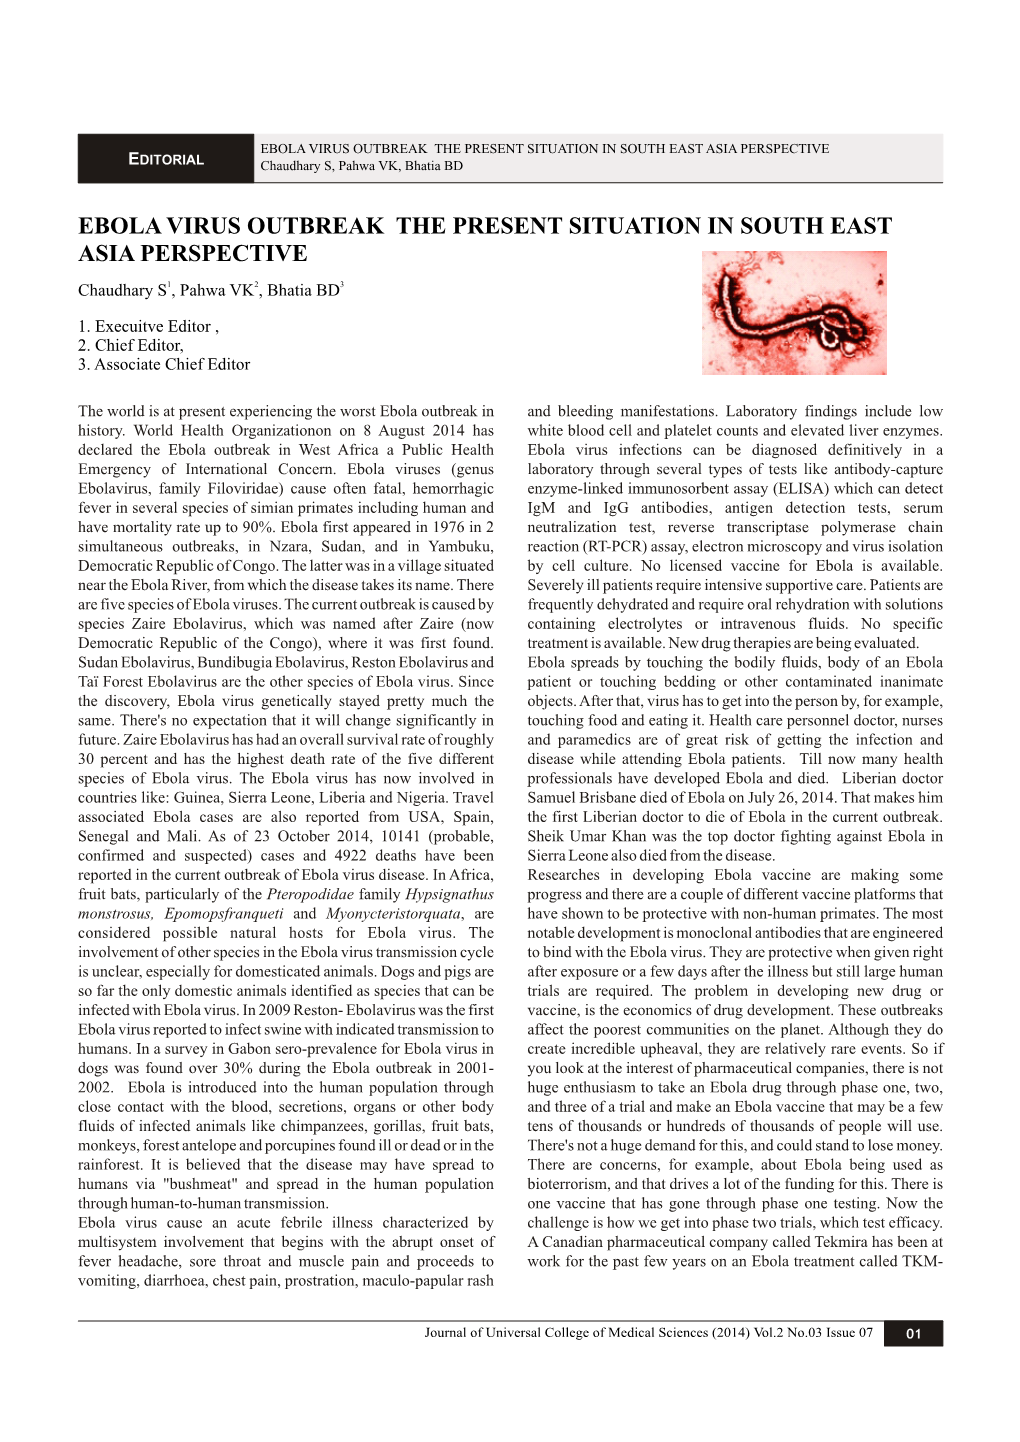 EBOLA VIRUS OUTBREAK the PRESENT SITUATION in SOUTH EAST ASIA PERSPECTIVE EDITORIAL Chaudhary S, Pahwa VK, Bhatia BD